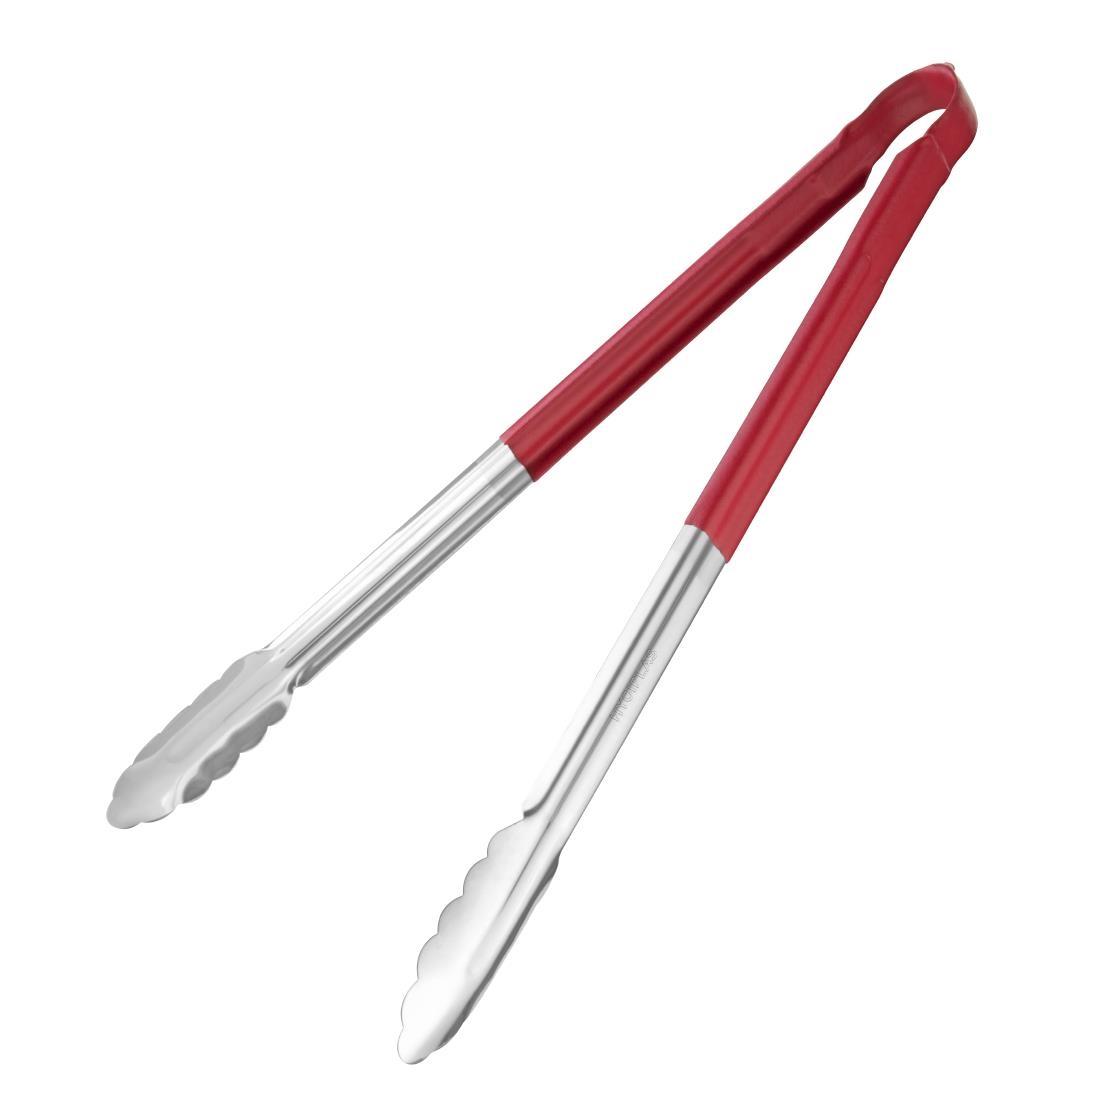 Hygiplas Colour Coded Serving Tong Red 405mm - HC854  - 1